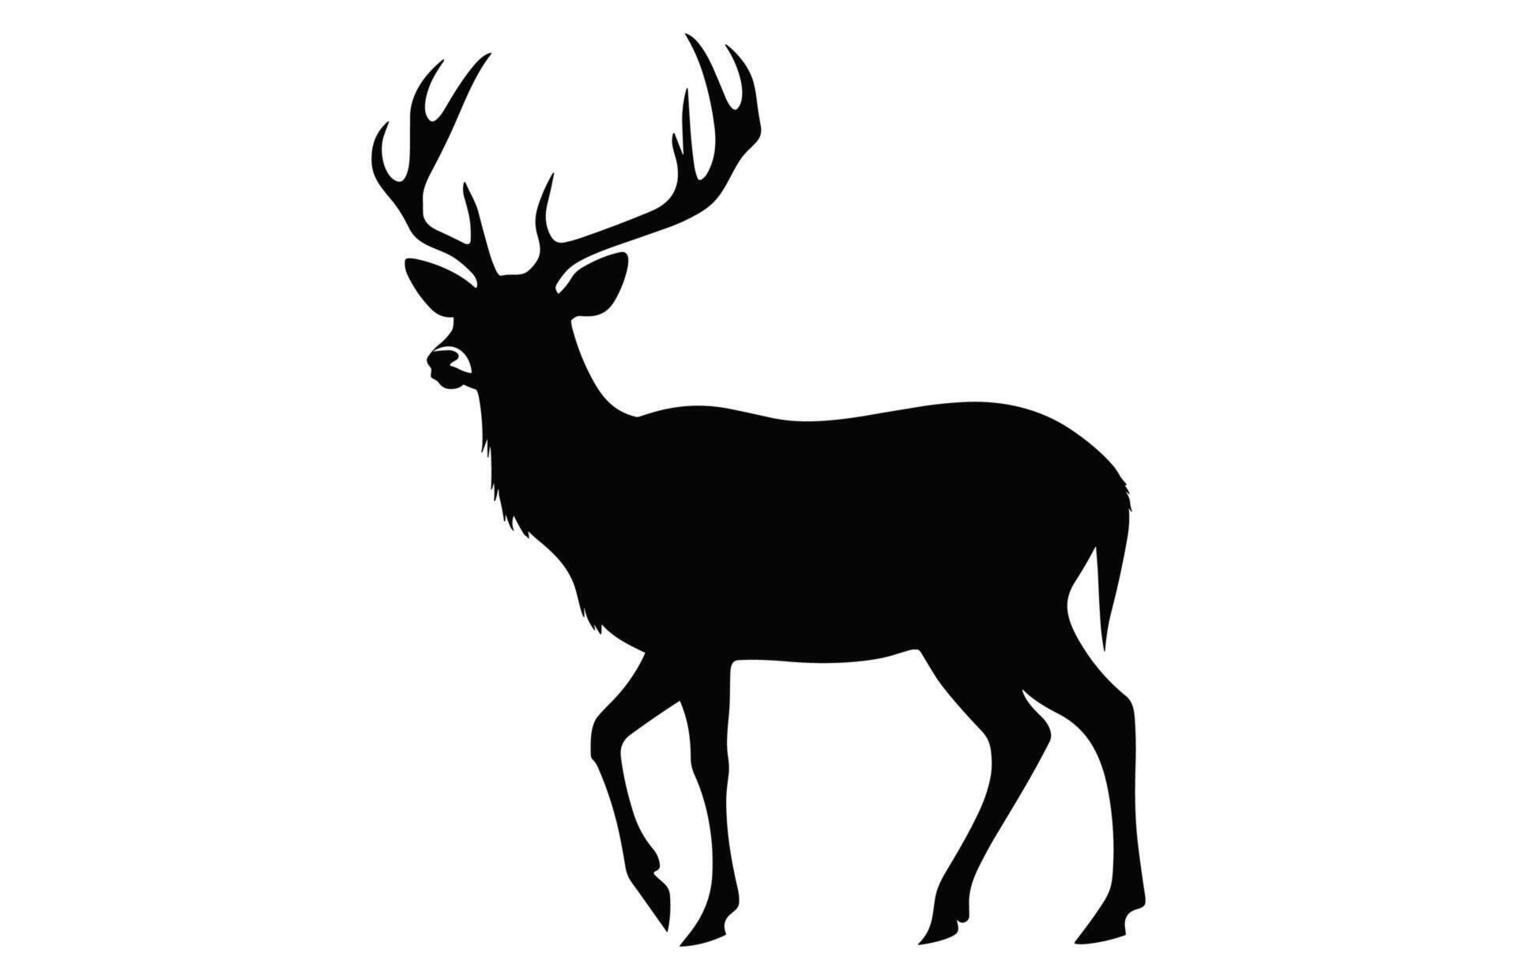 Deer Silhouette vector isolated on a white background, Deer antler black Clipart